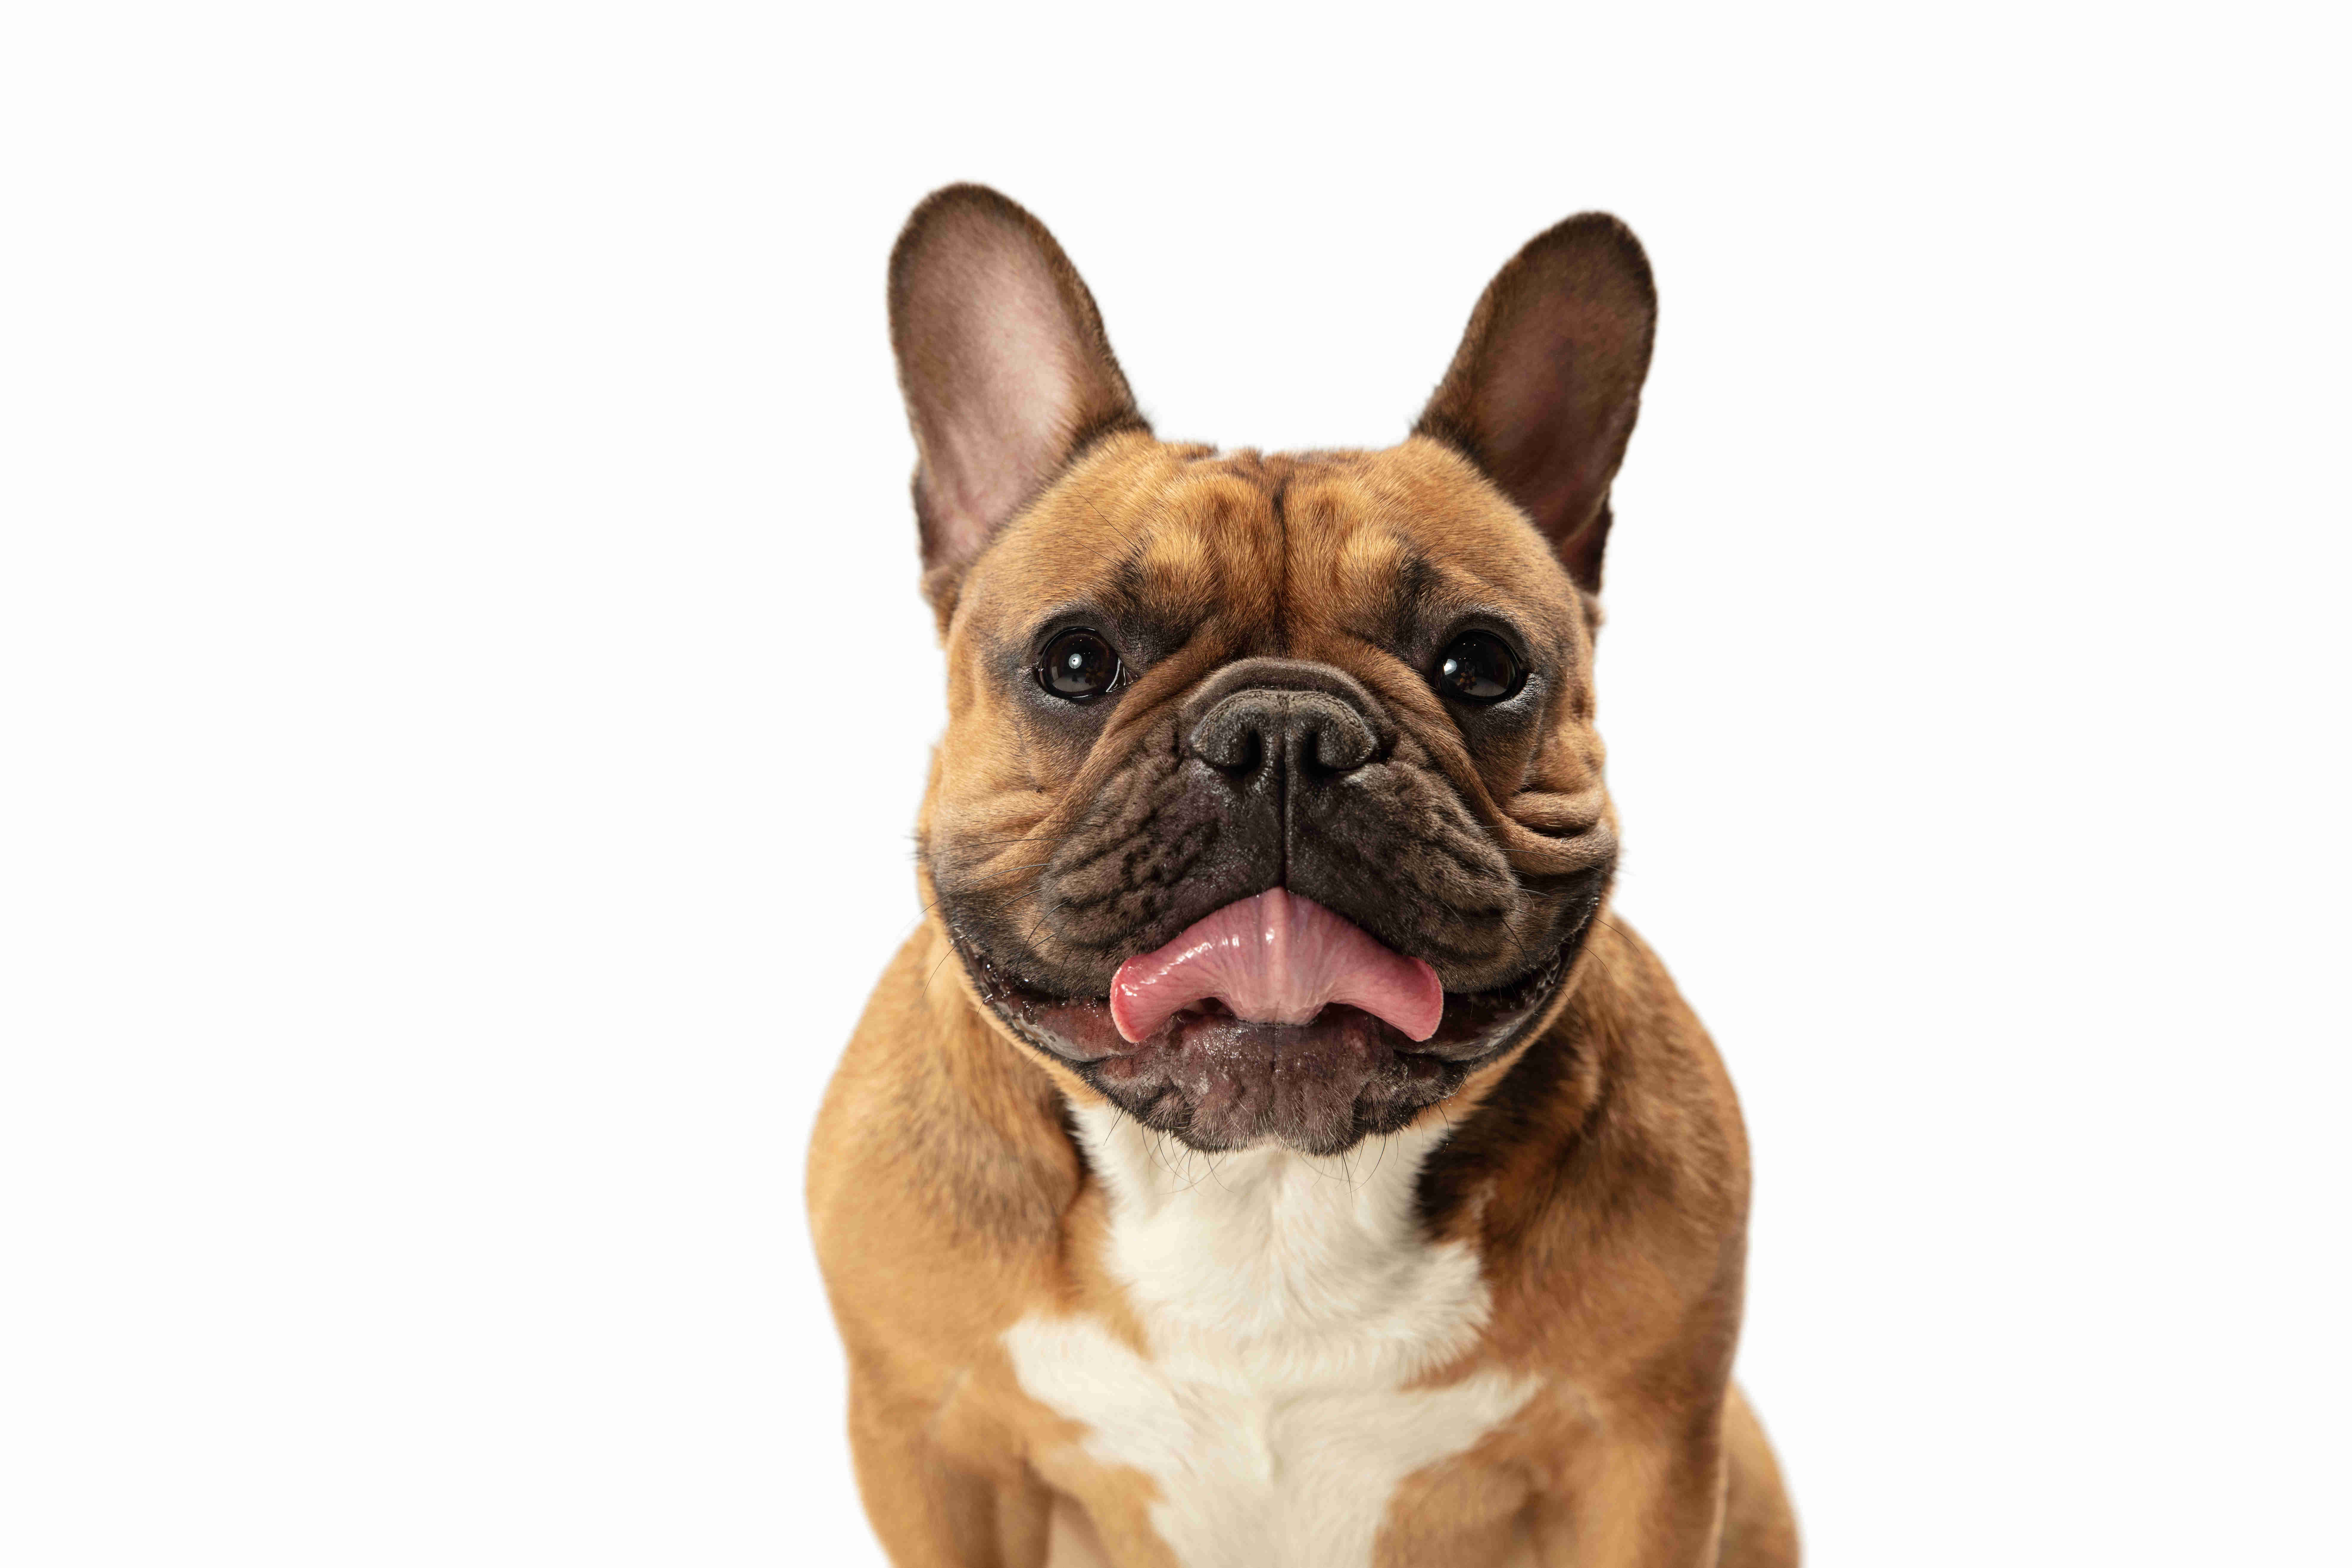 French Bulldog Puppy Exercise: How to Ensure Your Frenchie is Getting Enough Physical Activity